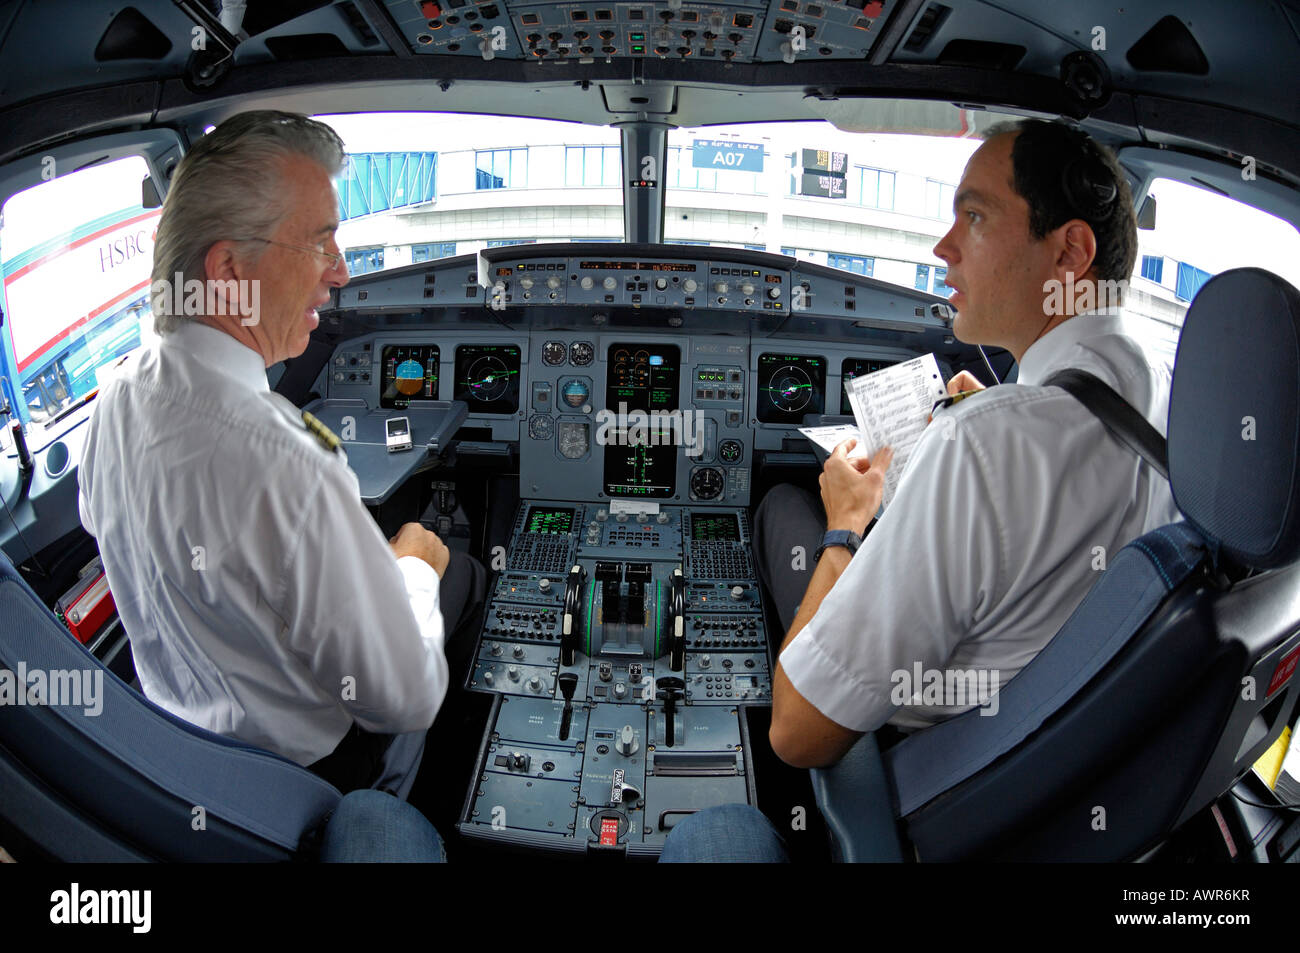 Pilots in the cockpit of an Airbus 321, briefing one another before takeoff Stock Photo